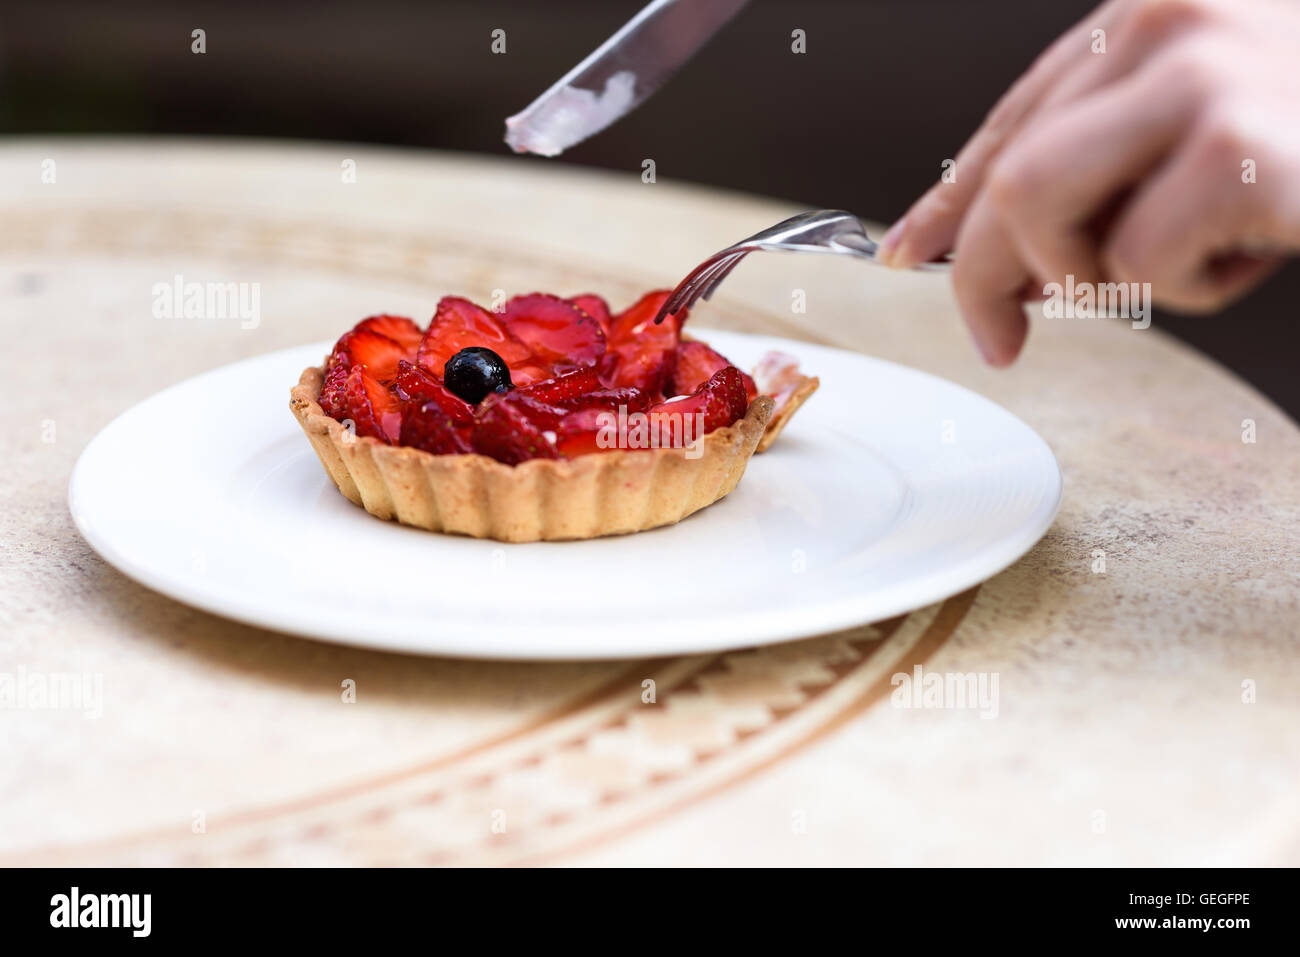 Photo of female hands cutting a fruit cake with strawberries, mint and blackcurrant, on a white plate on a restaurant table. Stock Photo